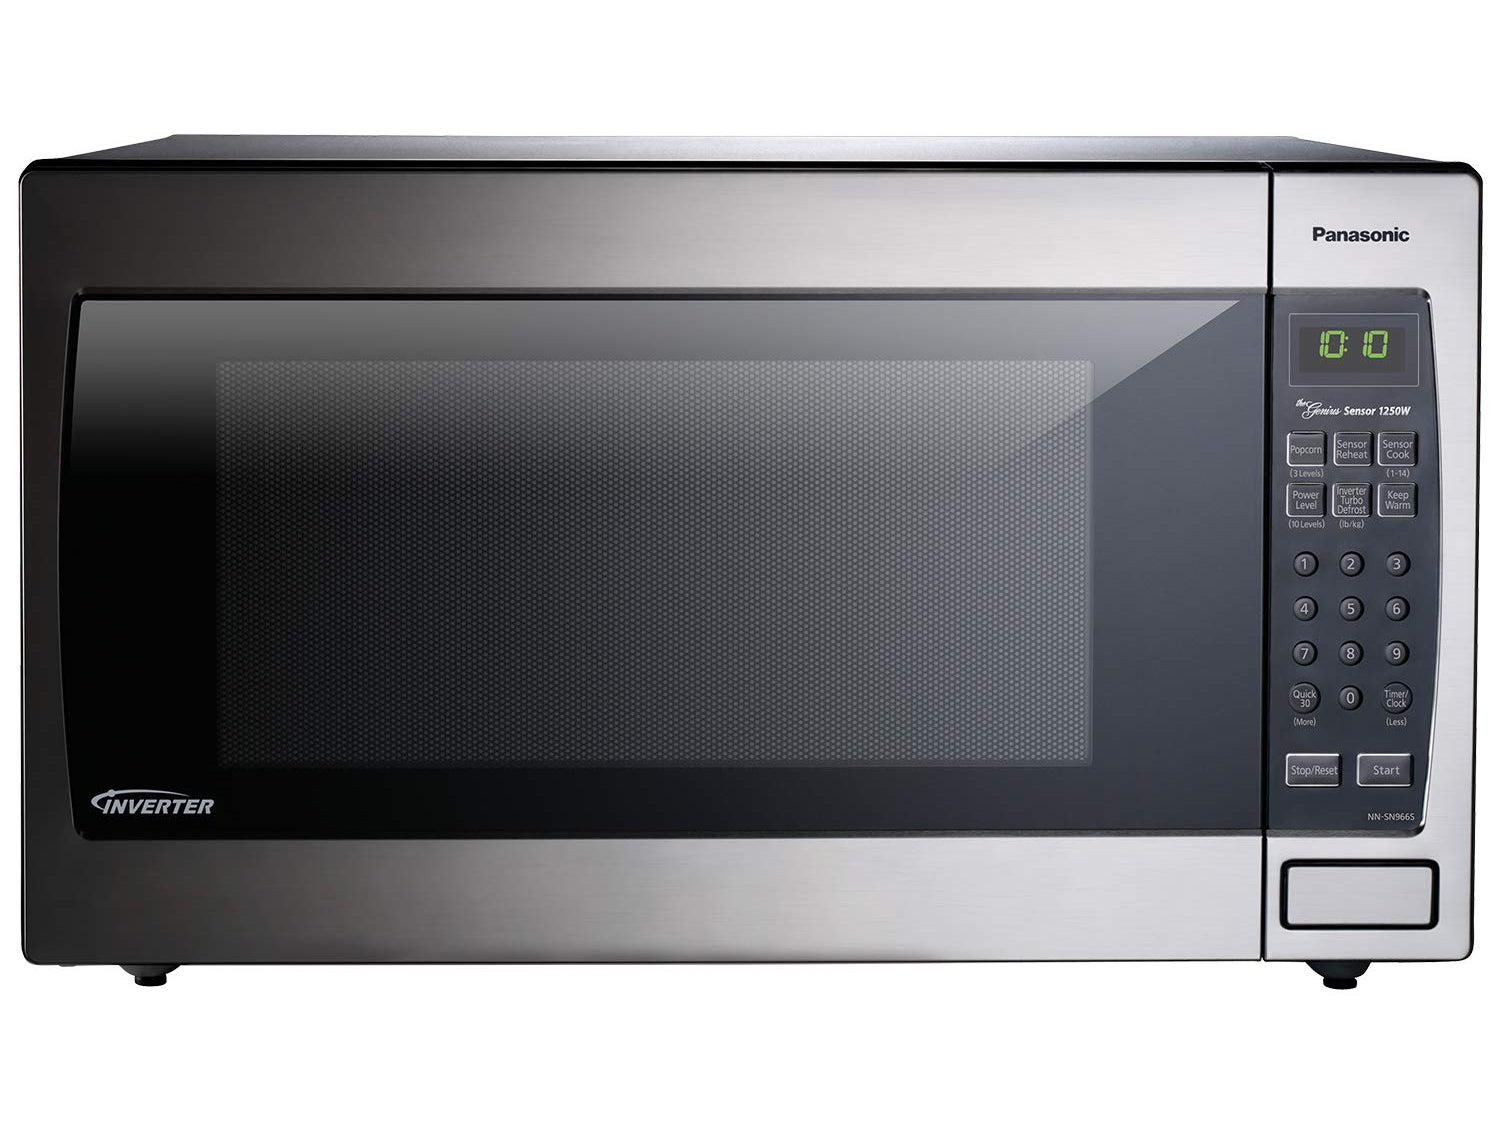 Prime Day 2020: Our favorite Toshiba microwave picks are on sale